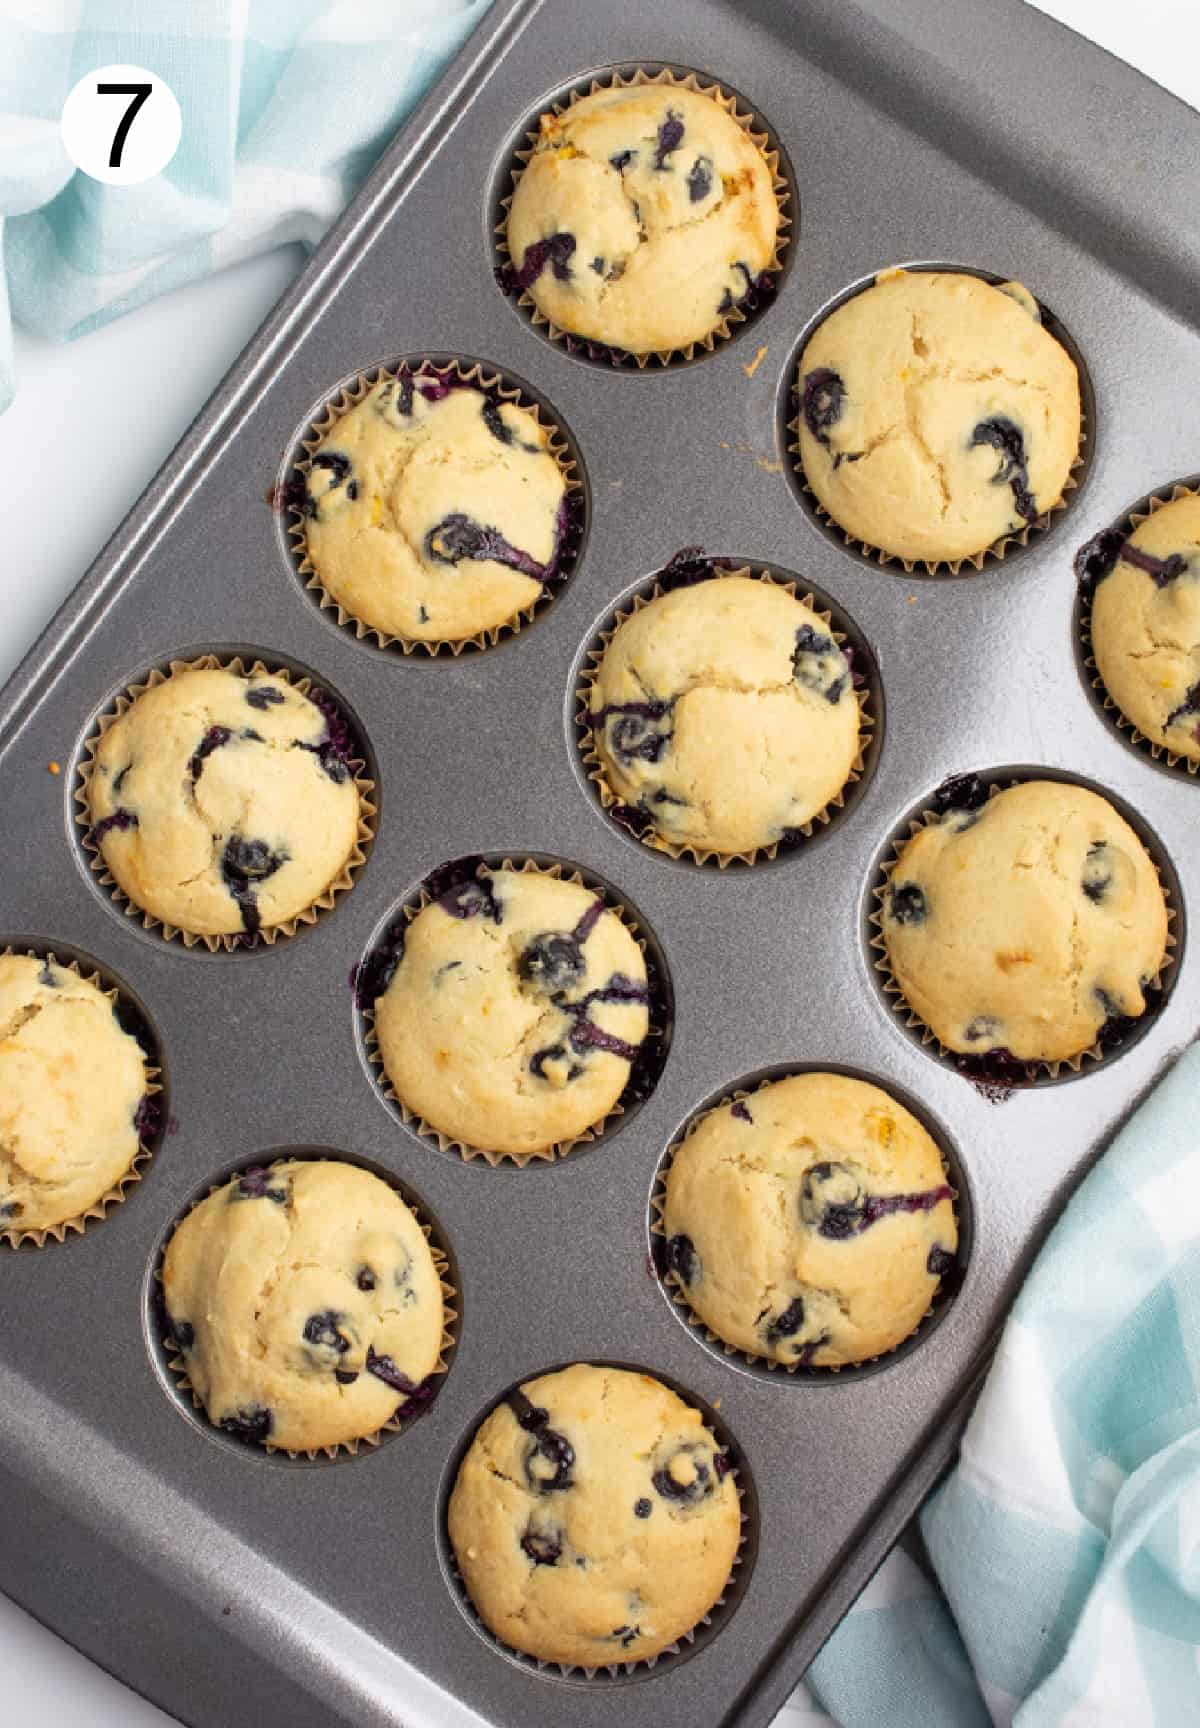 Freshly baked blueberry muffins in a muffin pan.